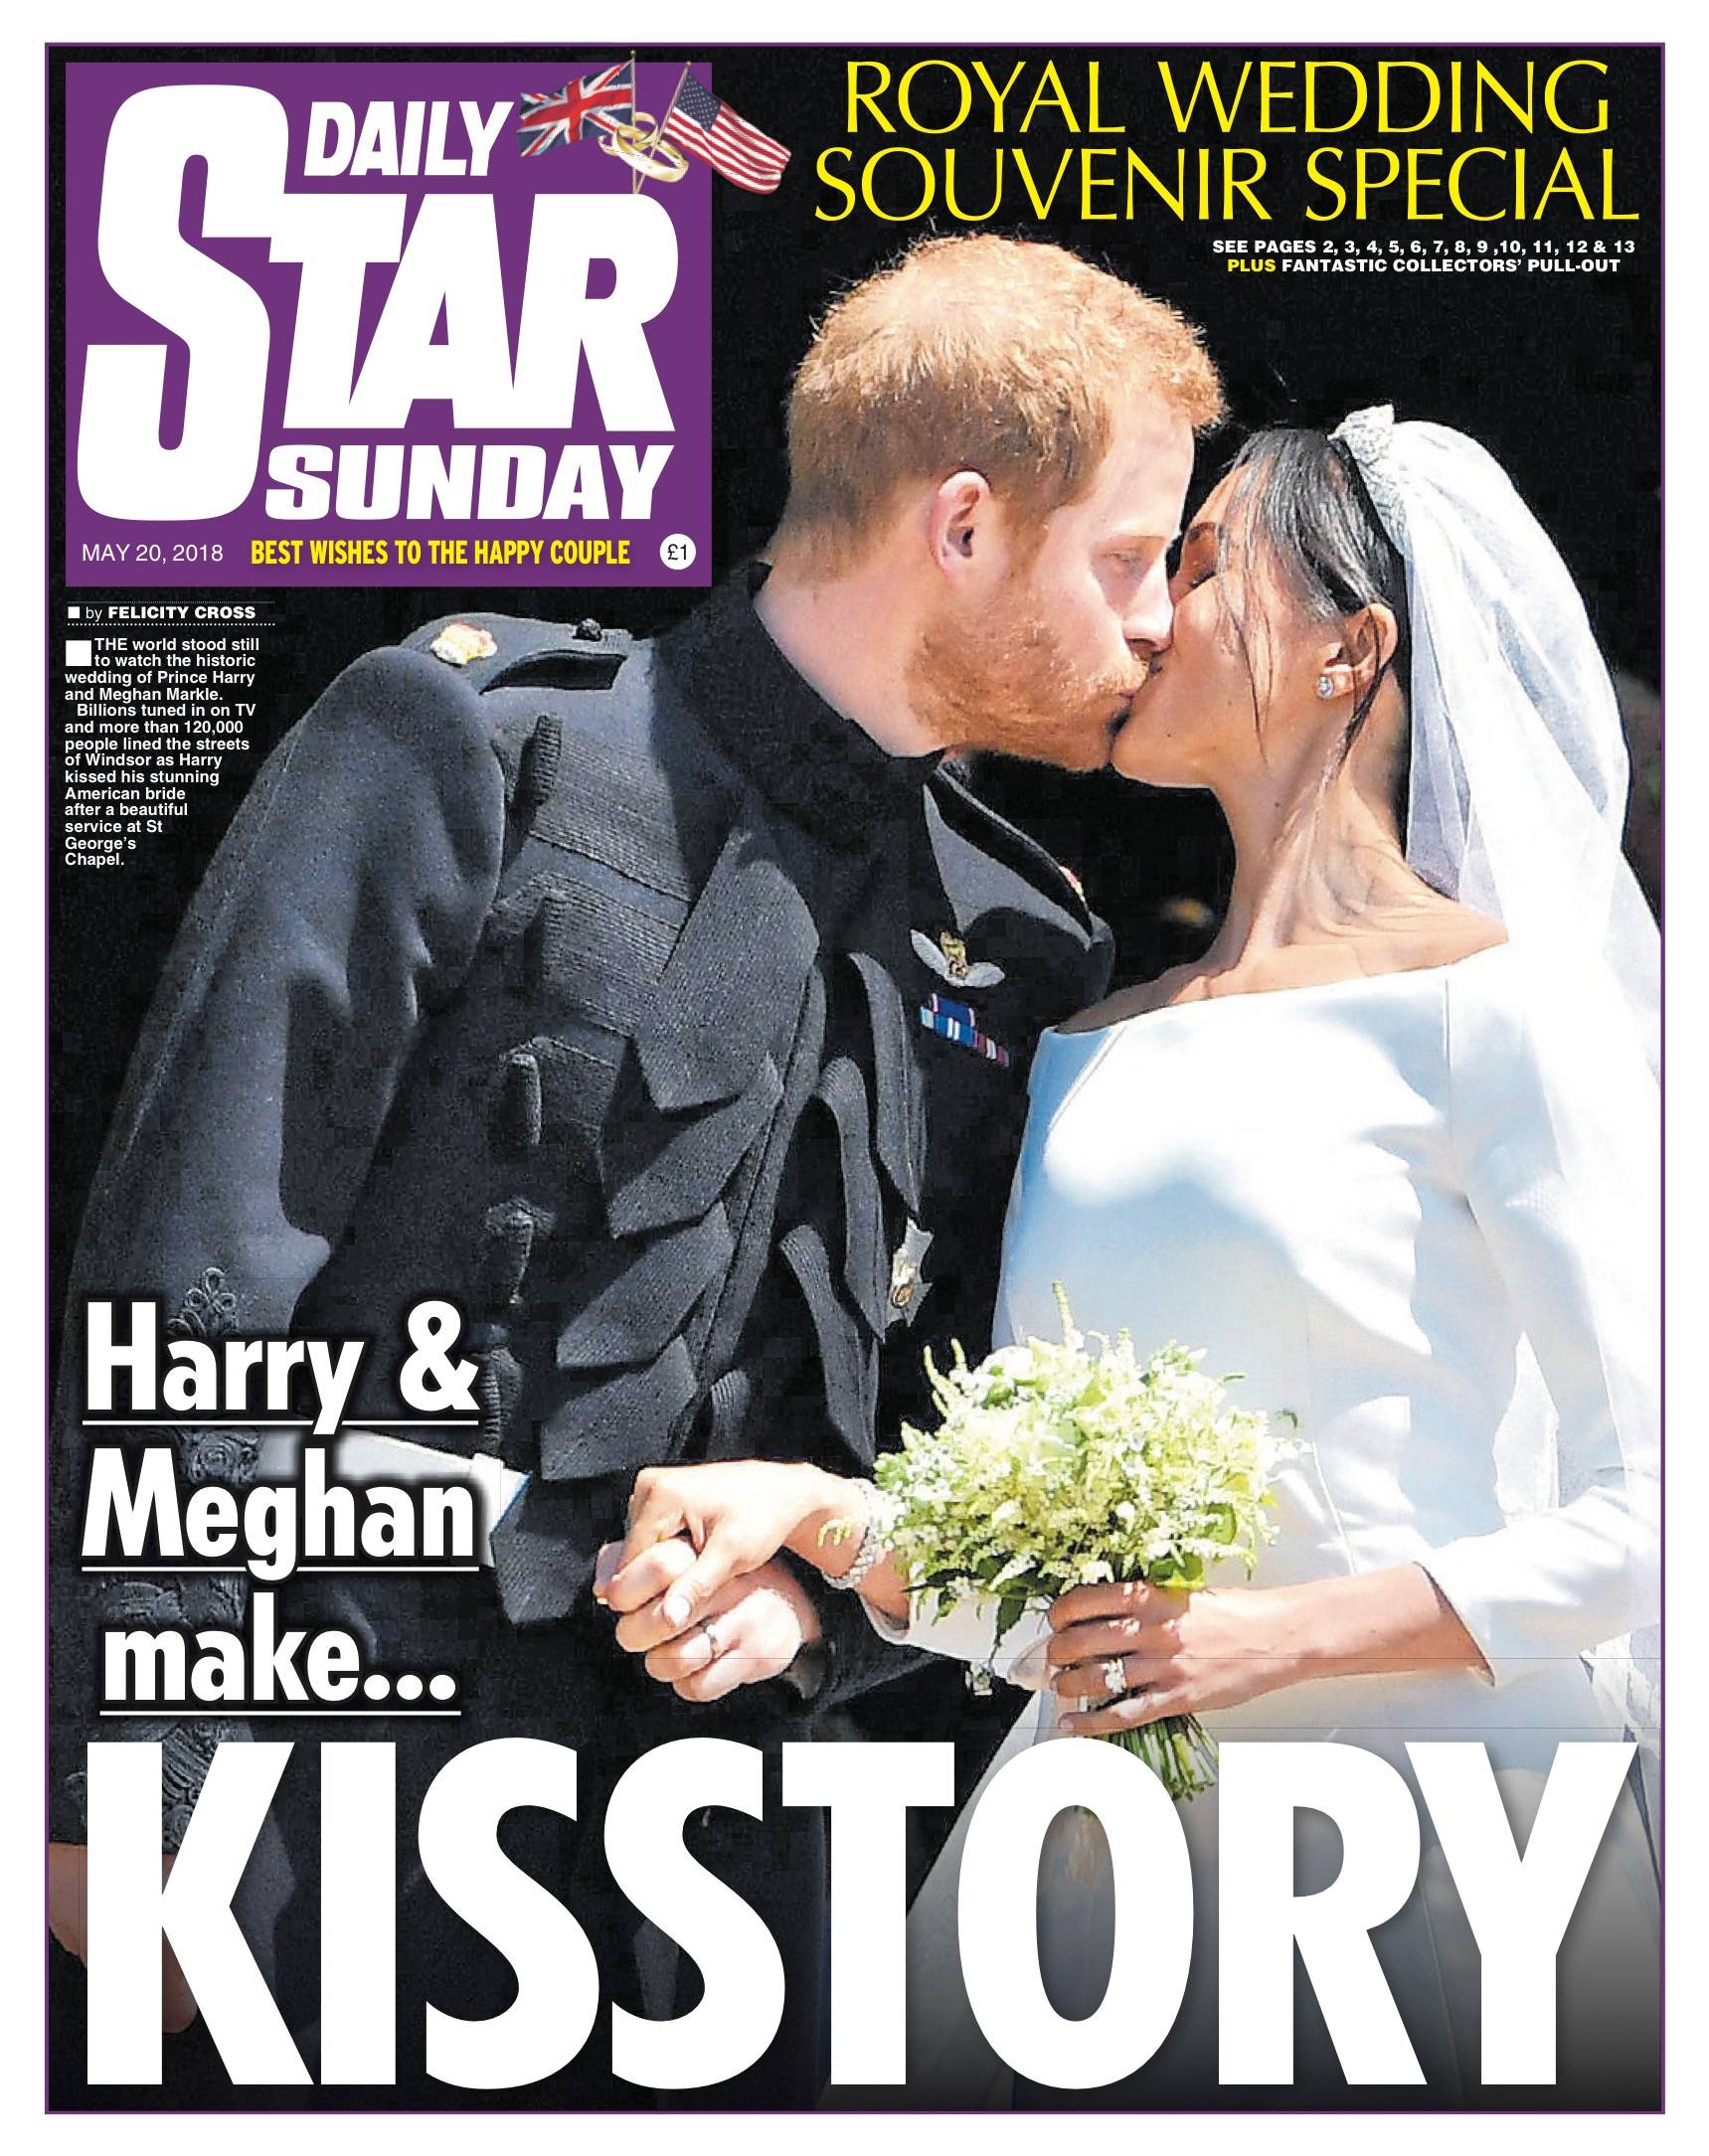 Front pages of the British newspapers on Sunday 20 May 2018 following the wedding of Prince Harry and Meghan Markle yesterday.